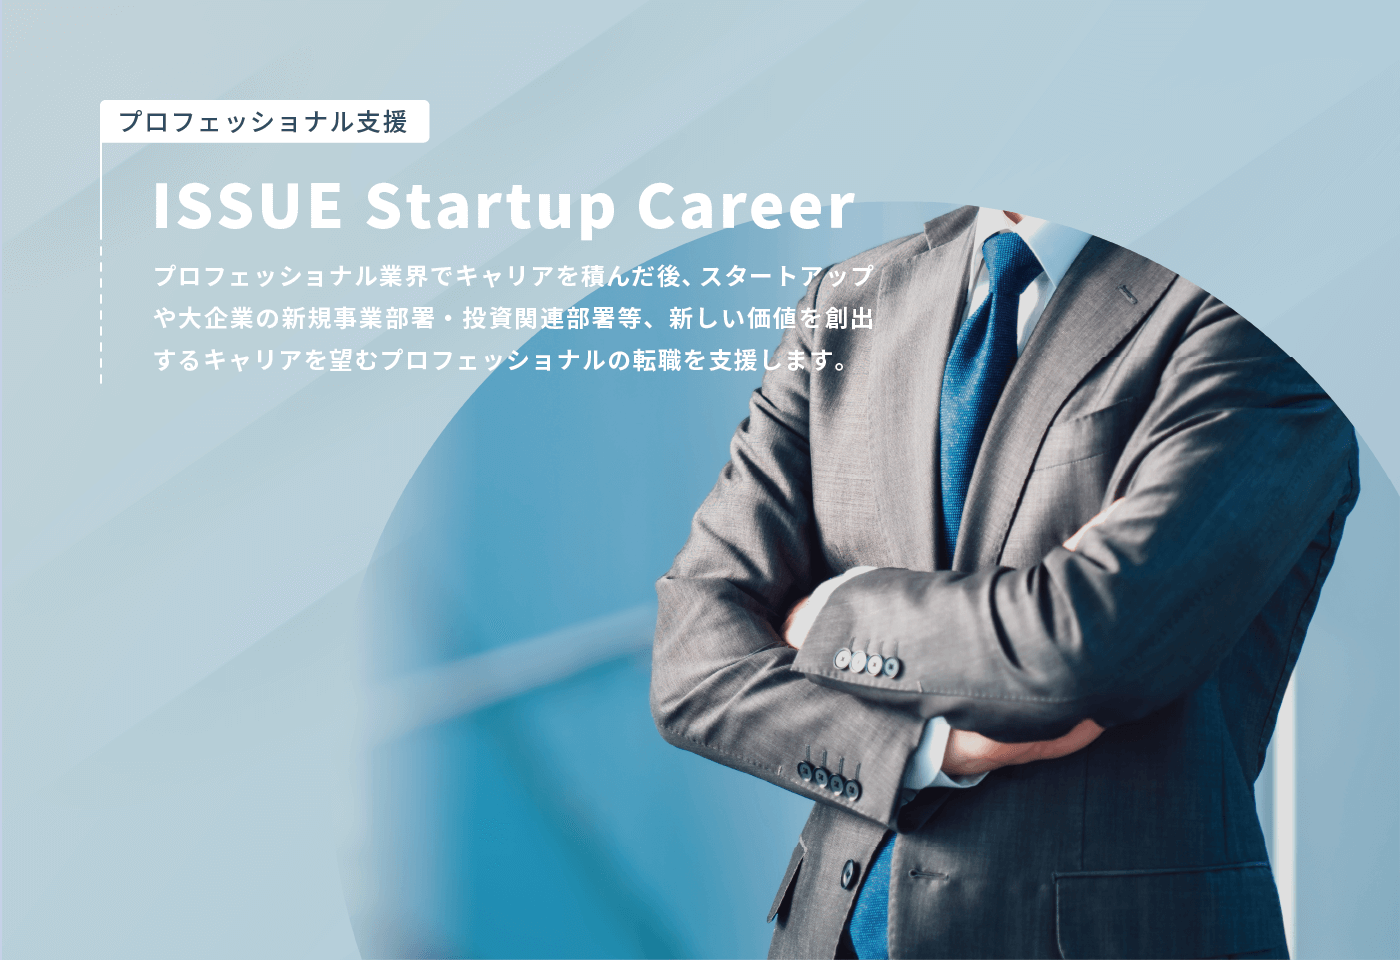 ISSUE Startup Career